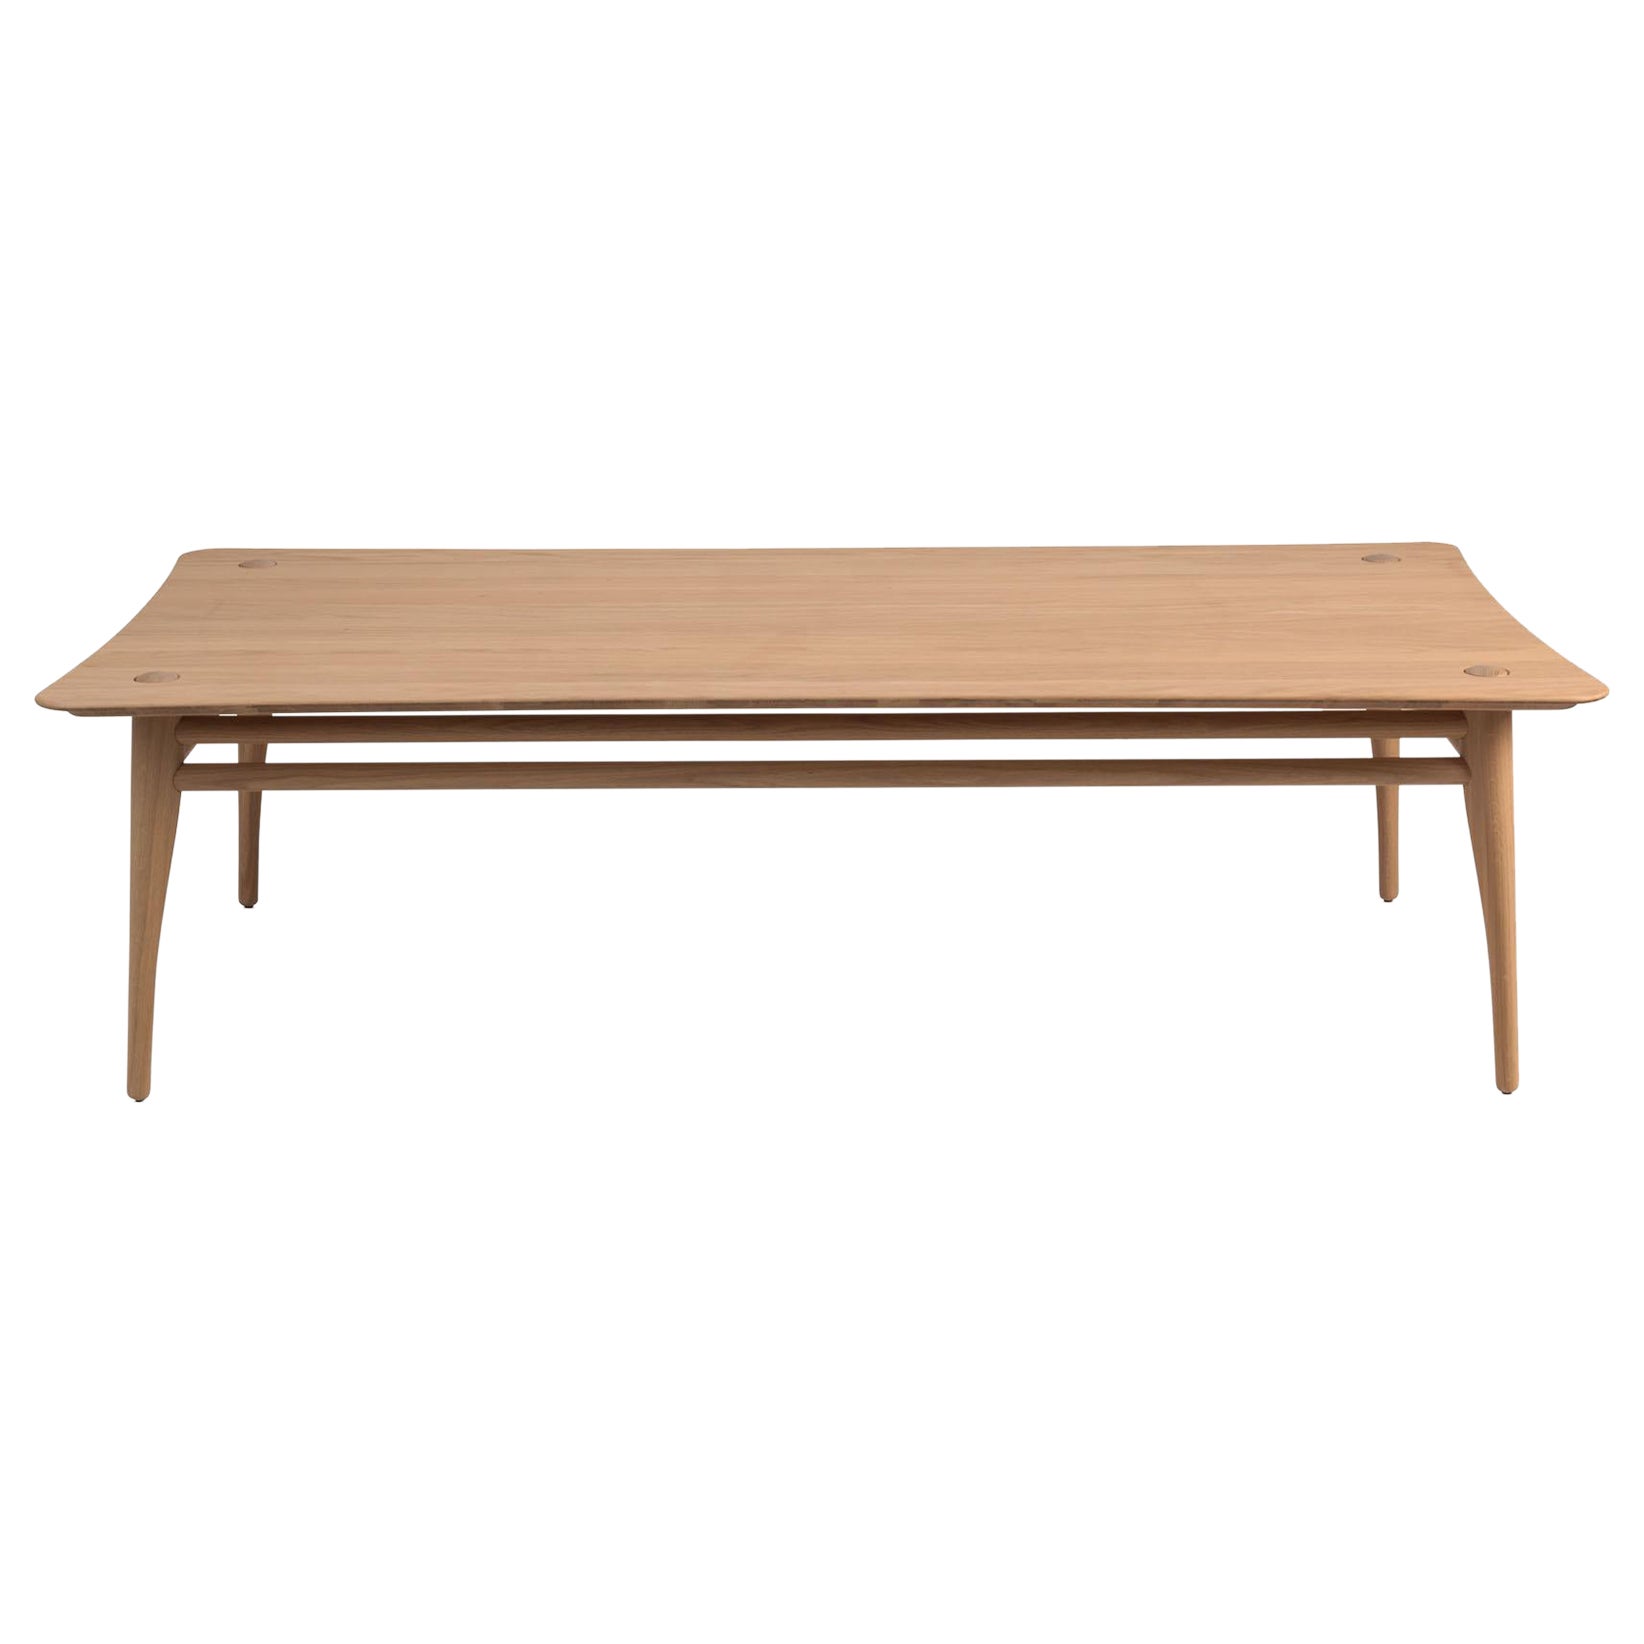 Revised Chilgrove - solid oak coffee table - rectangle 120x60cm For Sale